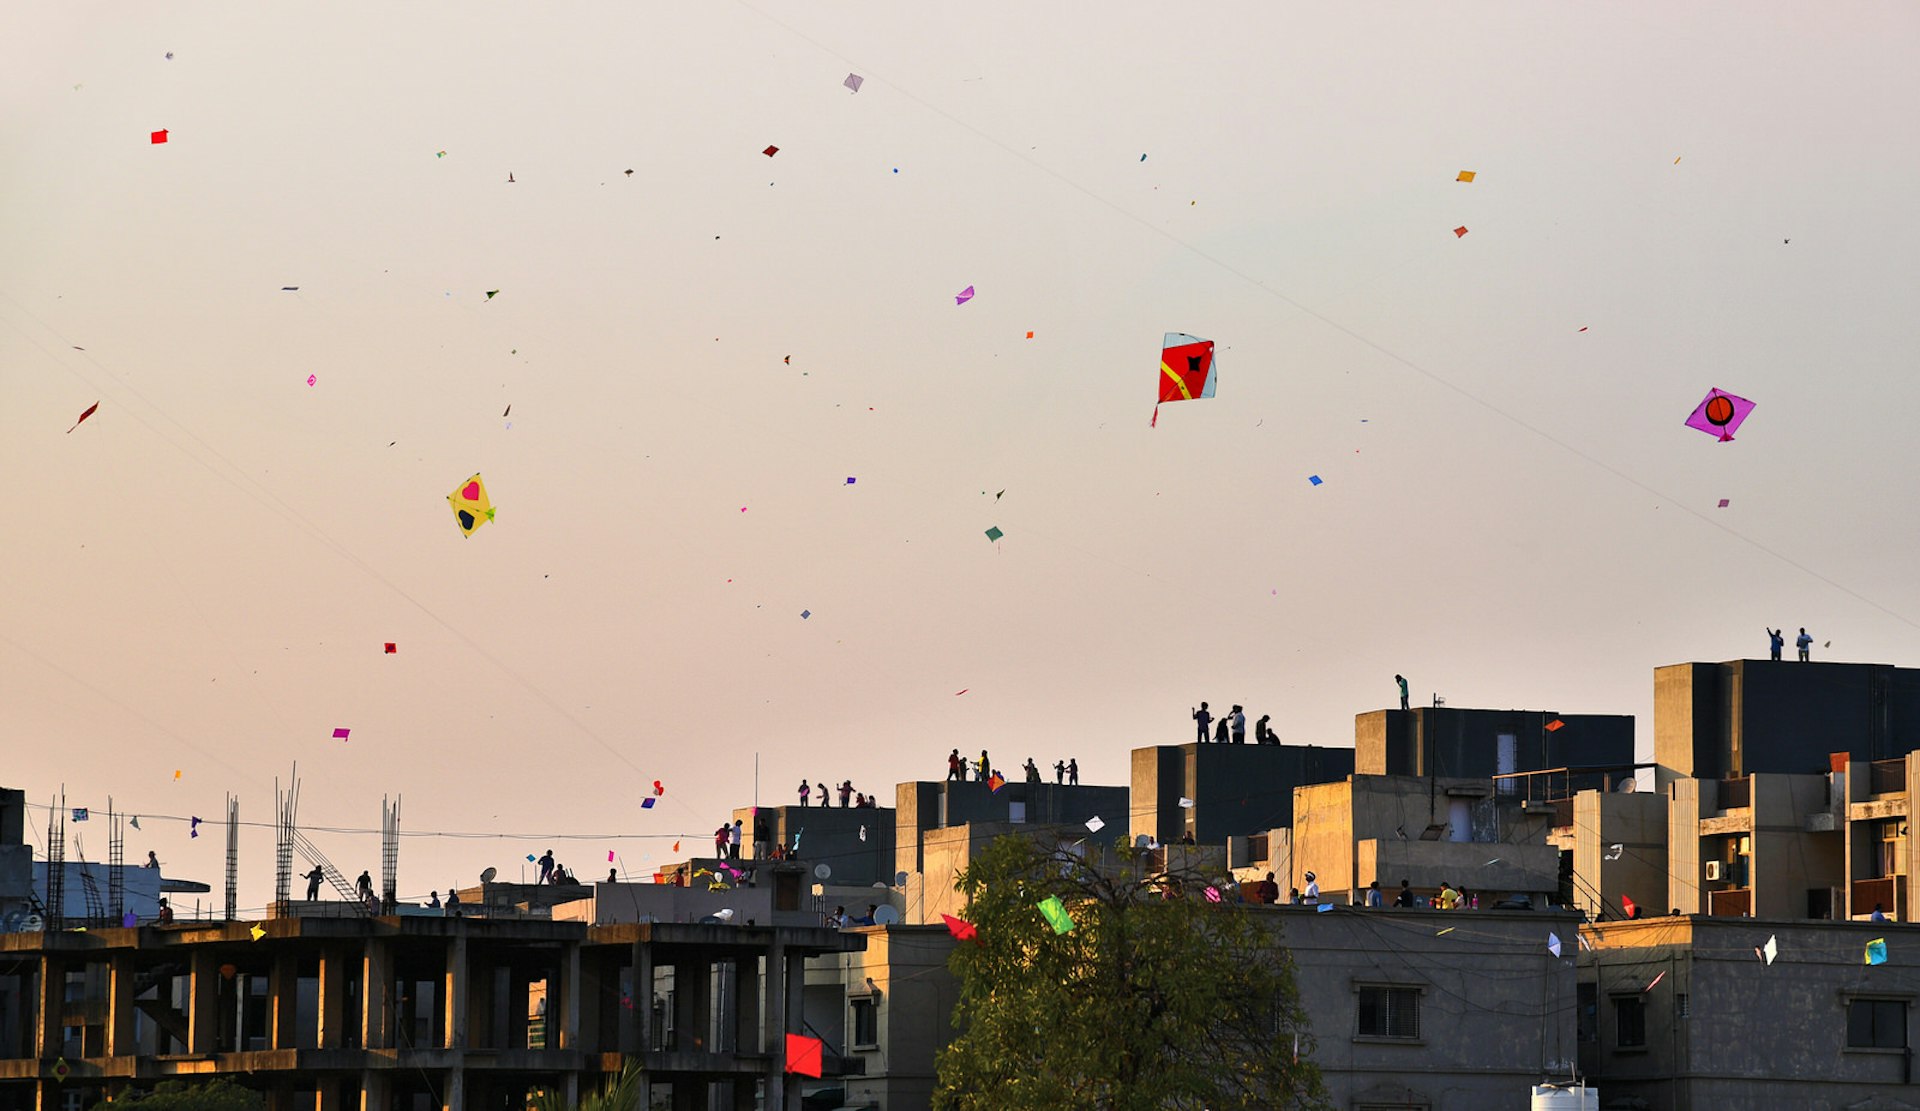 Colourful kites fly above the rooftops of Ahmedabad at dusk. Silhouettes of people are visible on the top of buildings.